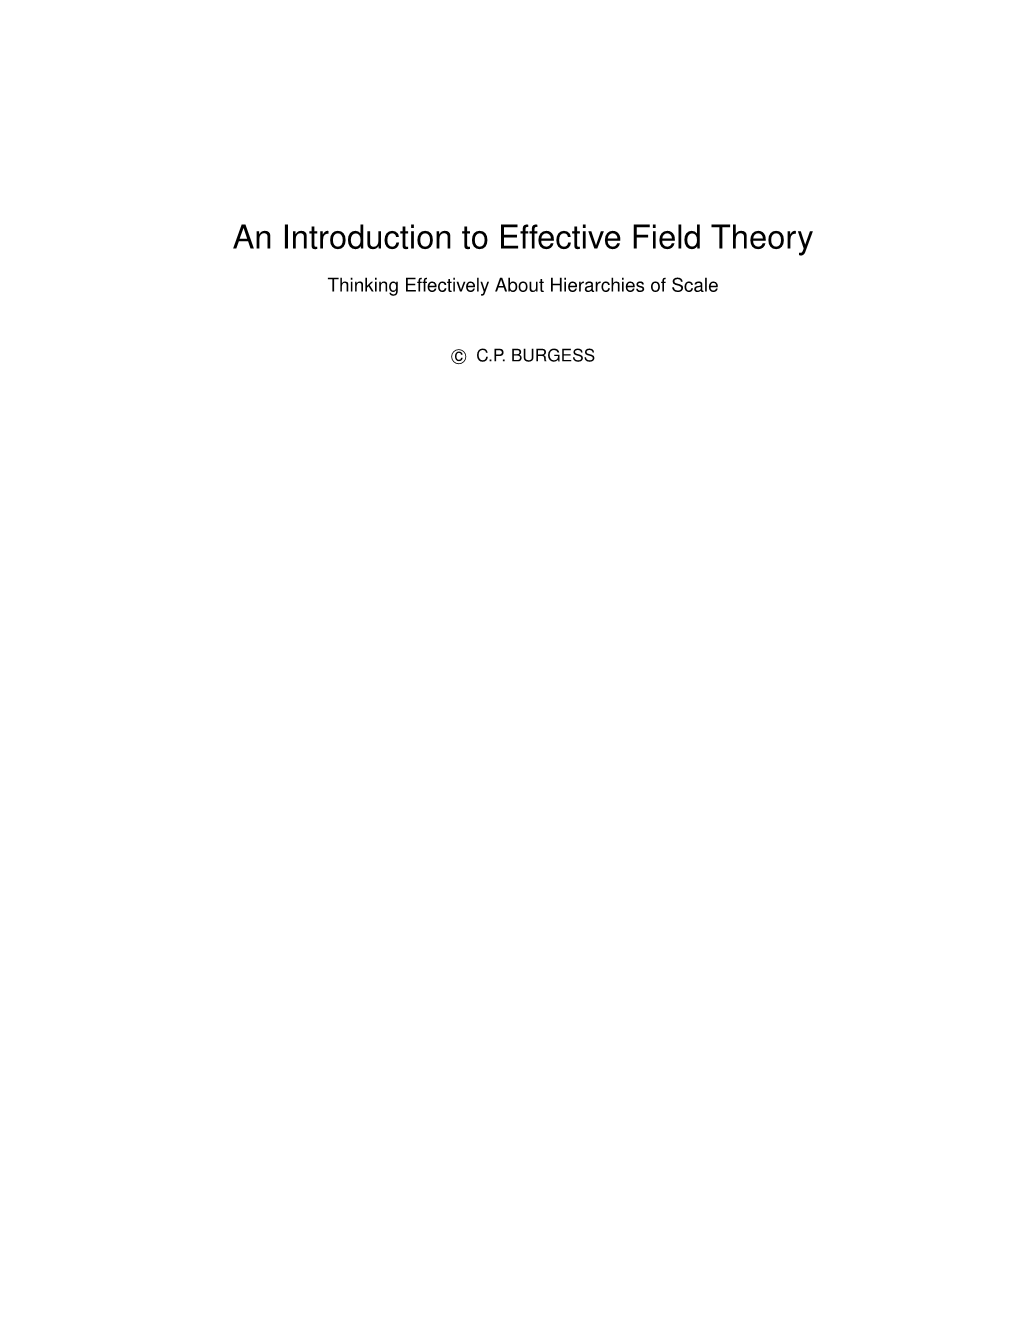 An Introduction to Effective Field Theory